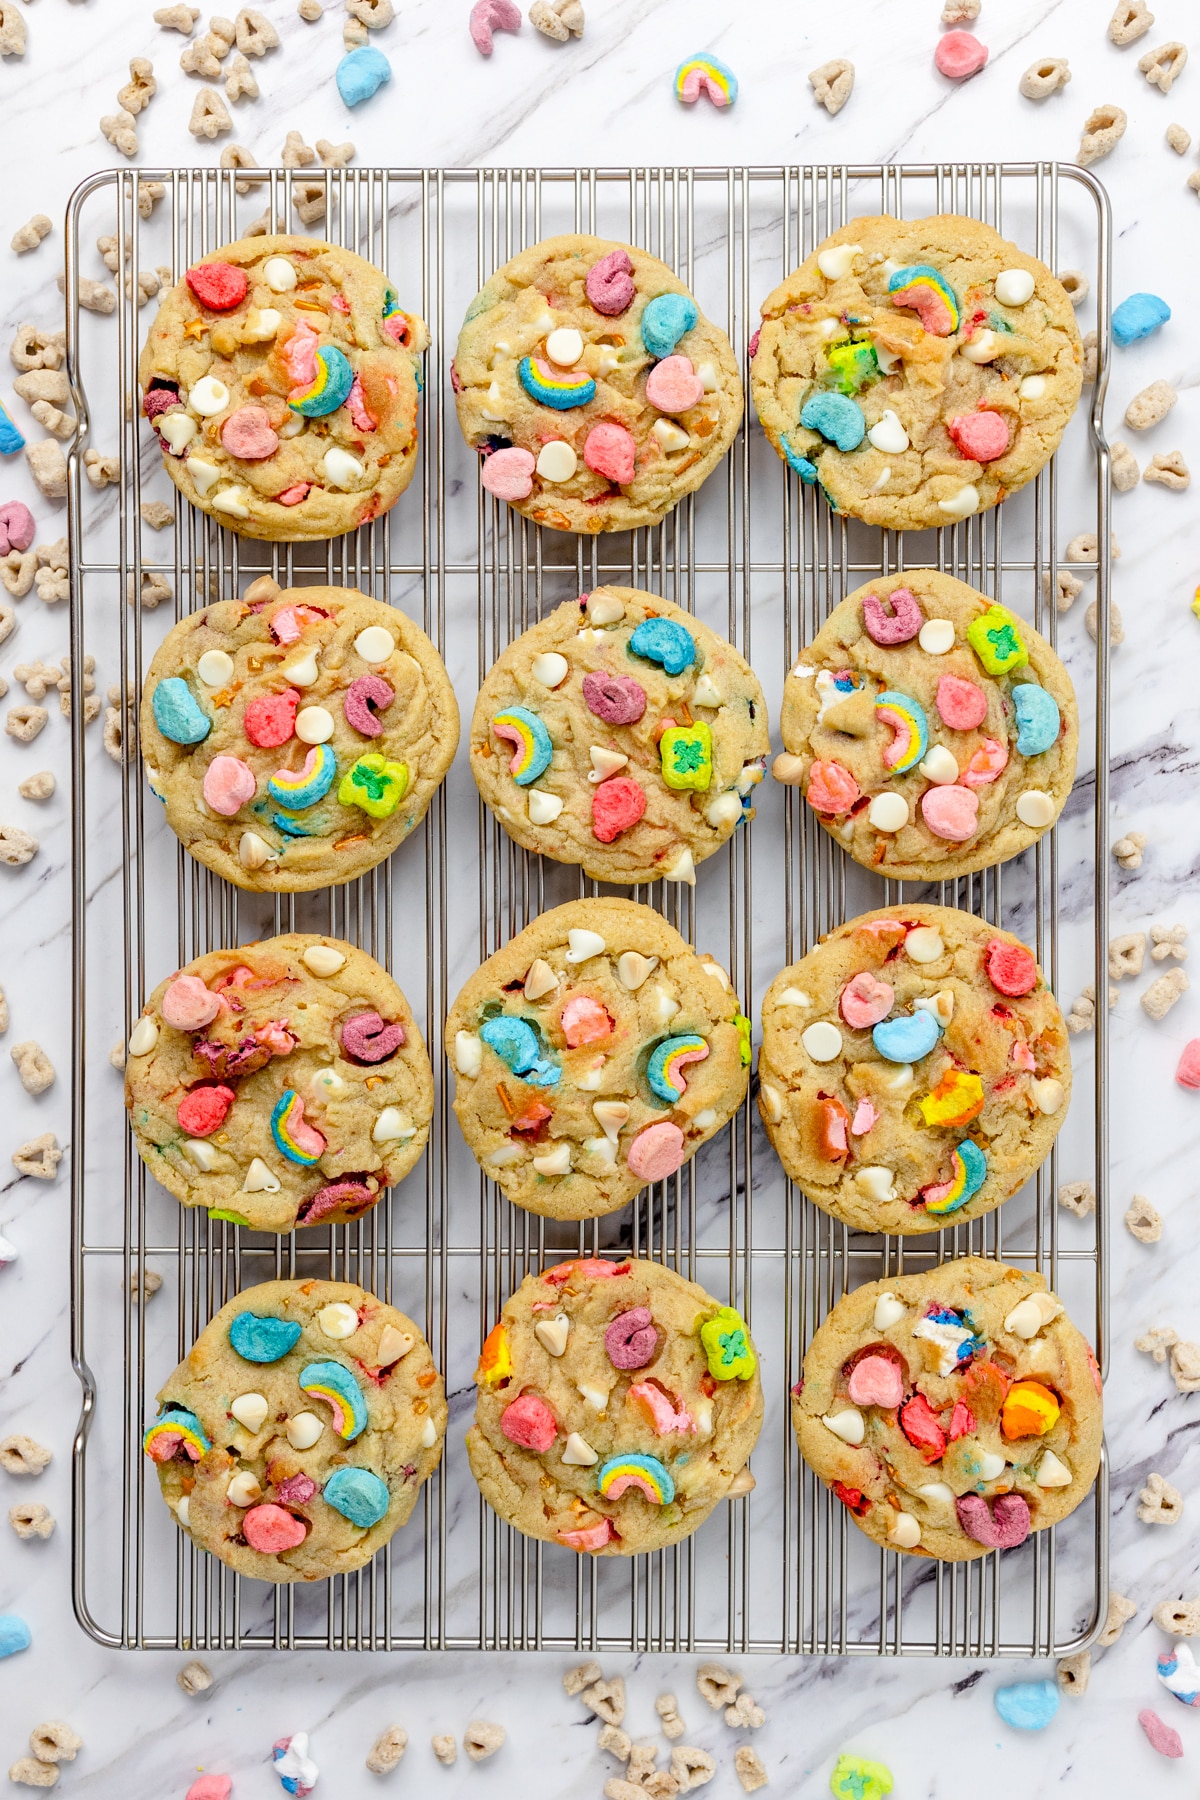 Top view of freshly baked Lucky Charms Cookies on a wire rack.